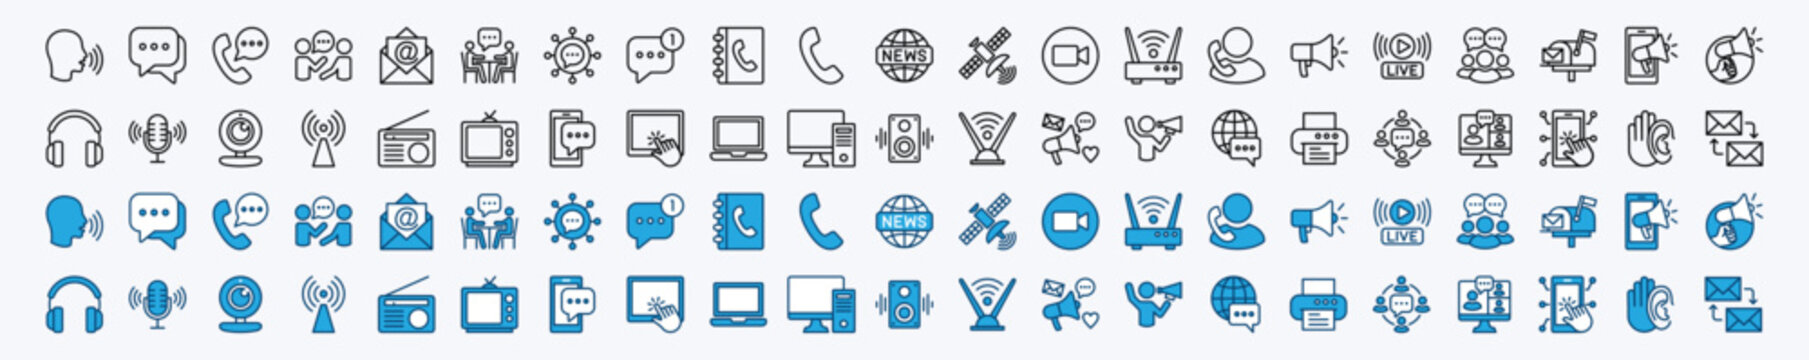 Speaking and communication icon set. Discussion, speech bubble, talking, chat, social media message, conversation, campaign, announce, technology for app and website. Vector illustration